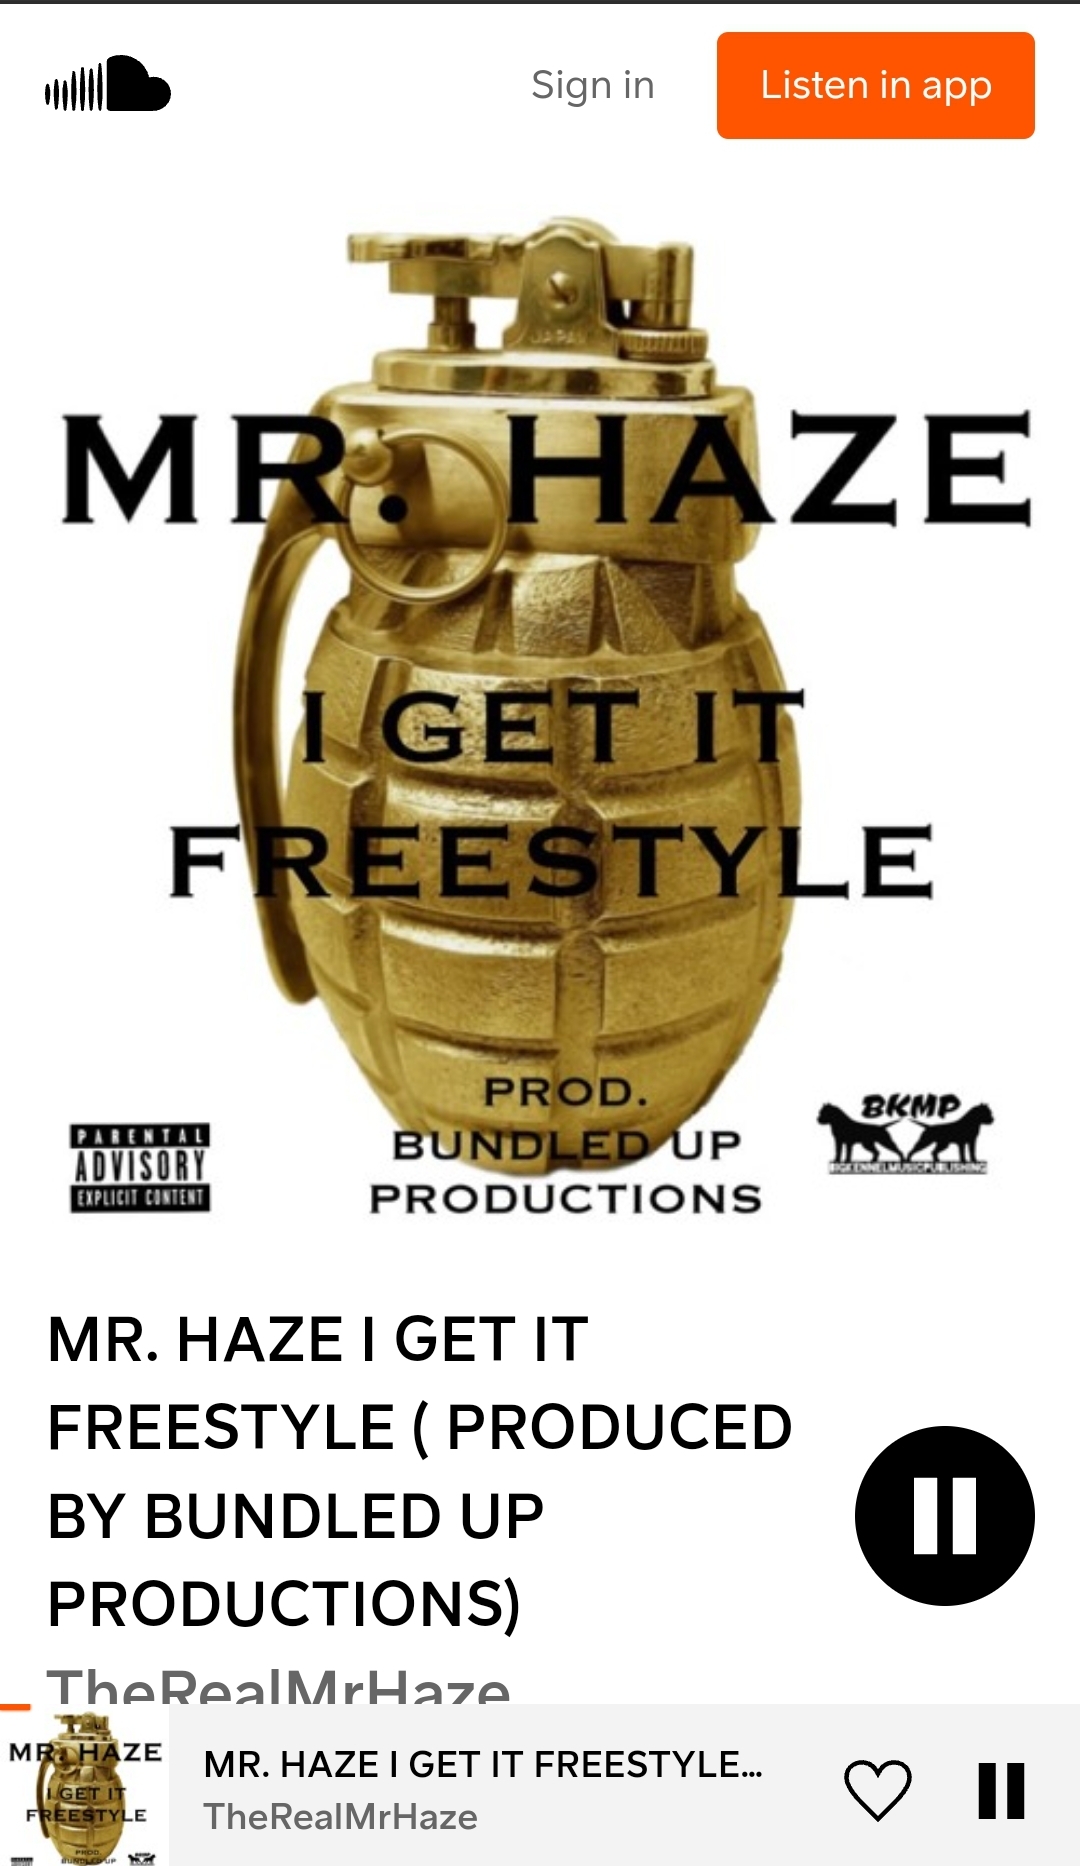 MR. HAZE I GET IT FREESTYLE ( PRODUCED BY BUNDLED UP PRODUCTIONS)